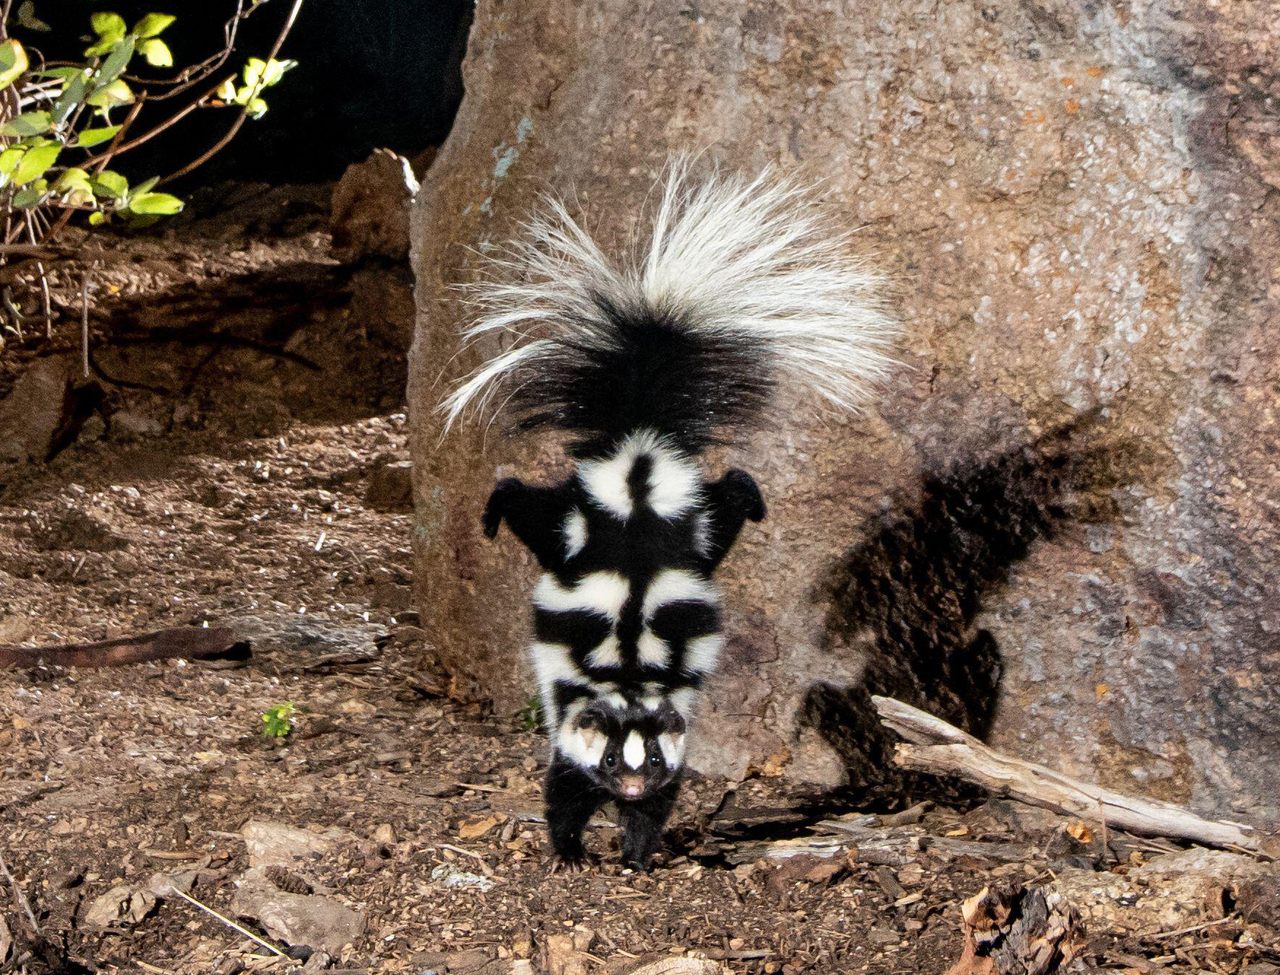 Spotted skunks perform an impressive handstand to appear twice their size and ward off would-be predators.